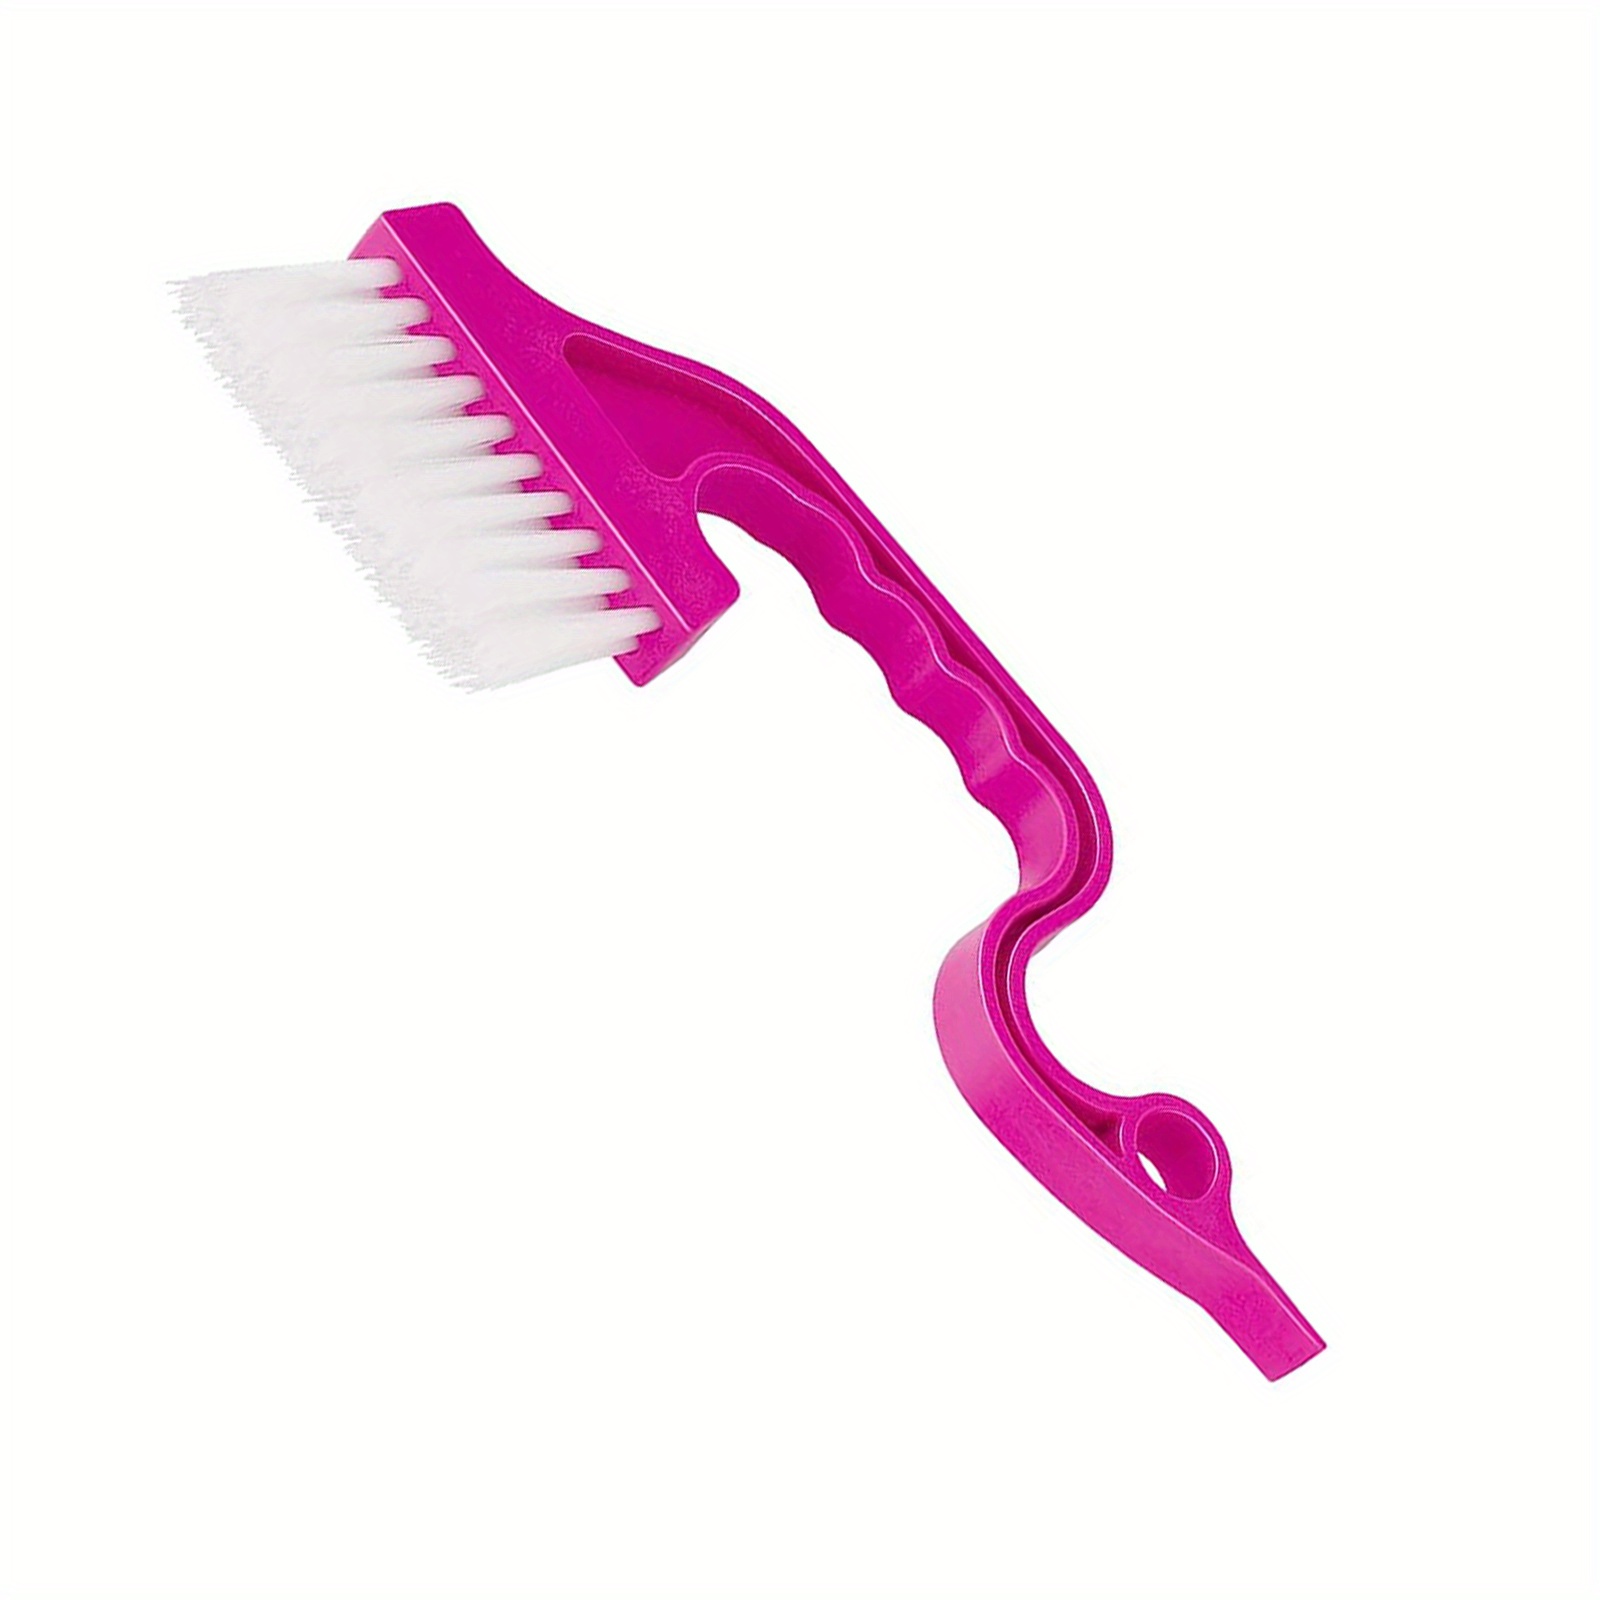  Gap Cleaning Brush, Hand-held Crevice Cleaning Brush